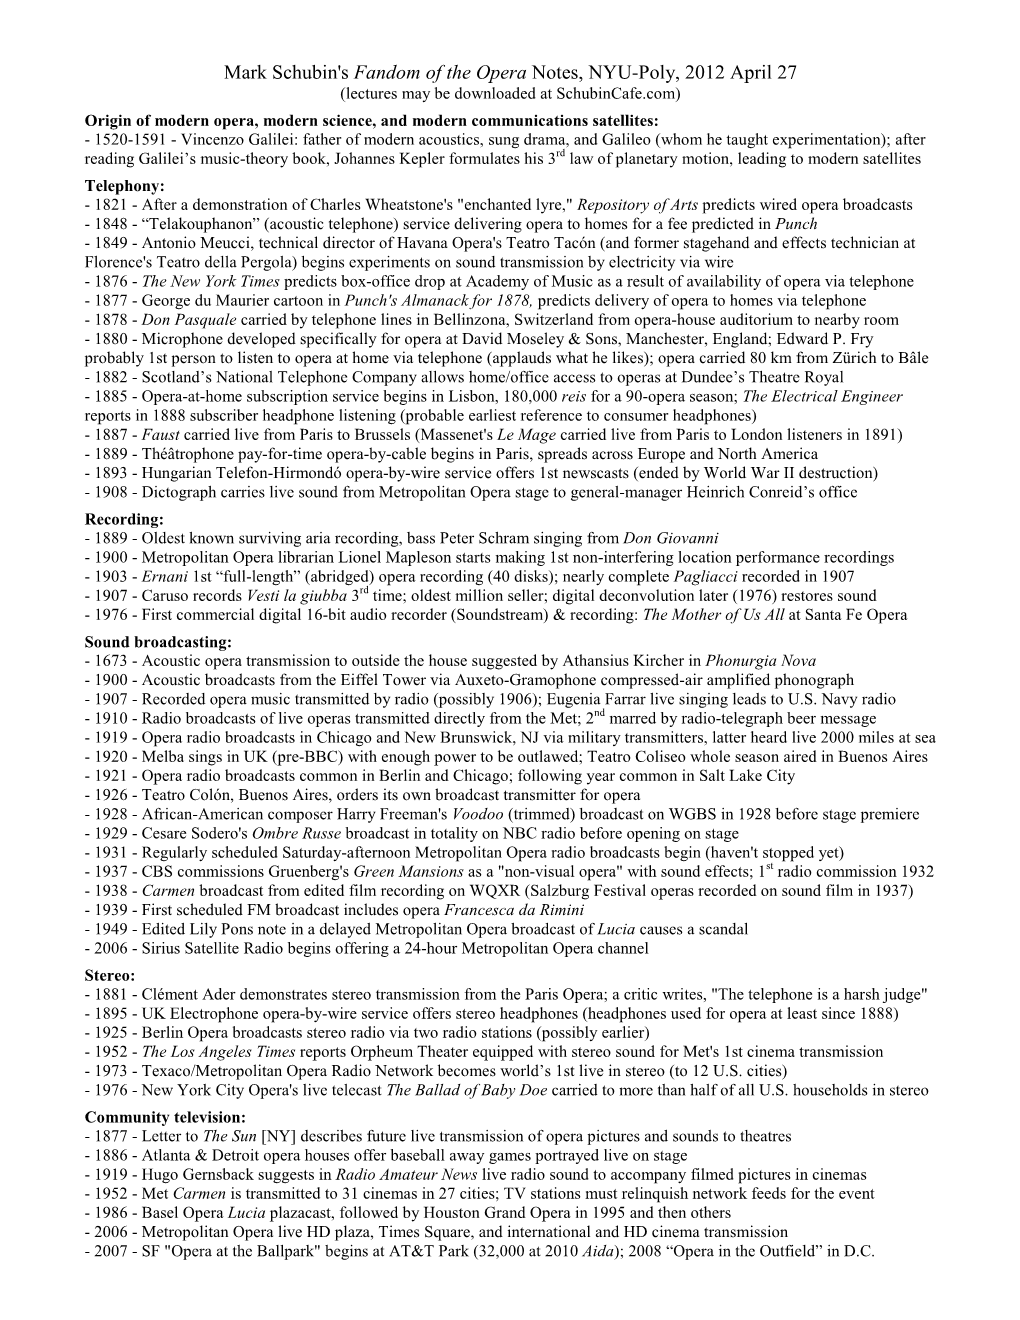 Mark Schubin's Fandom of the Opera Notes, NYU-Poly, 2012 April 27 (Lectures May Be Downloaded at Schubincafe.Com)